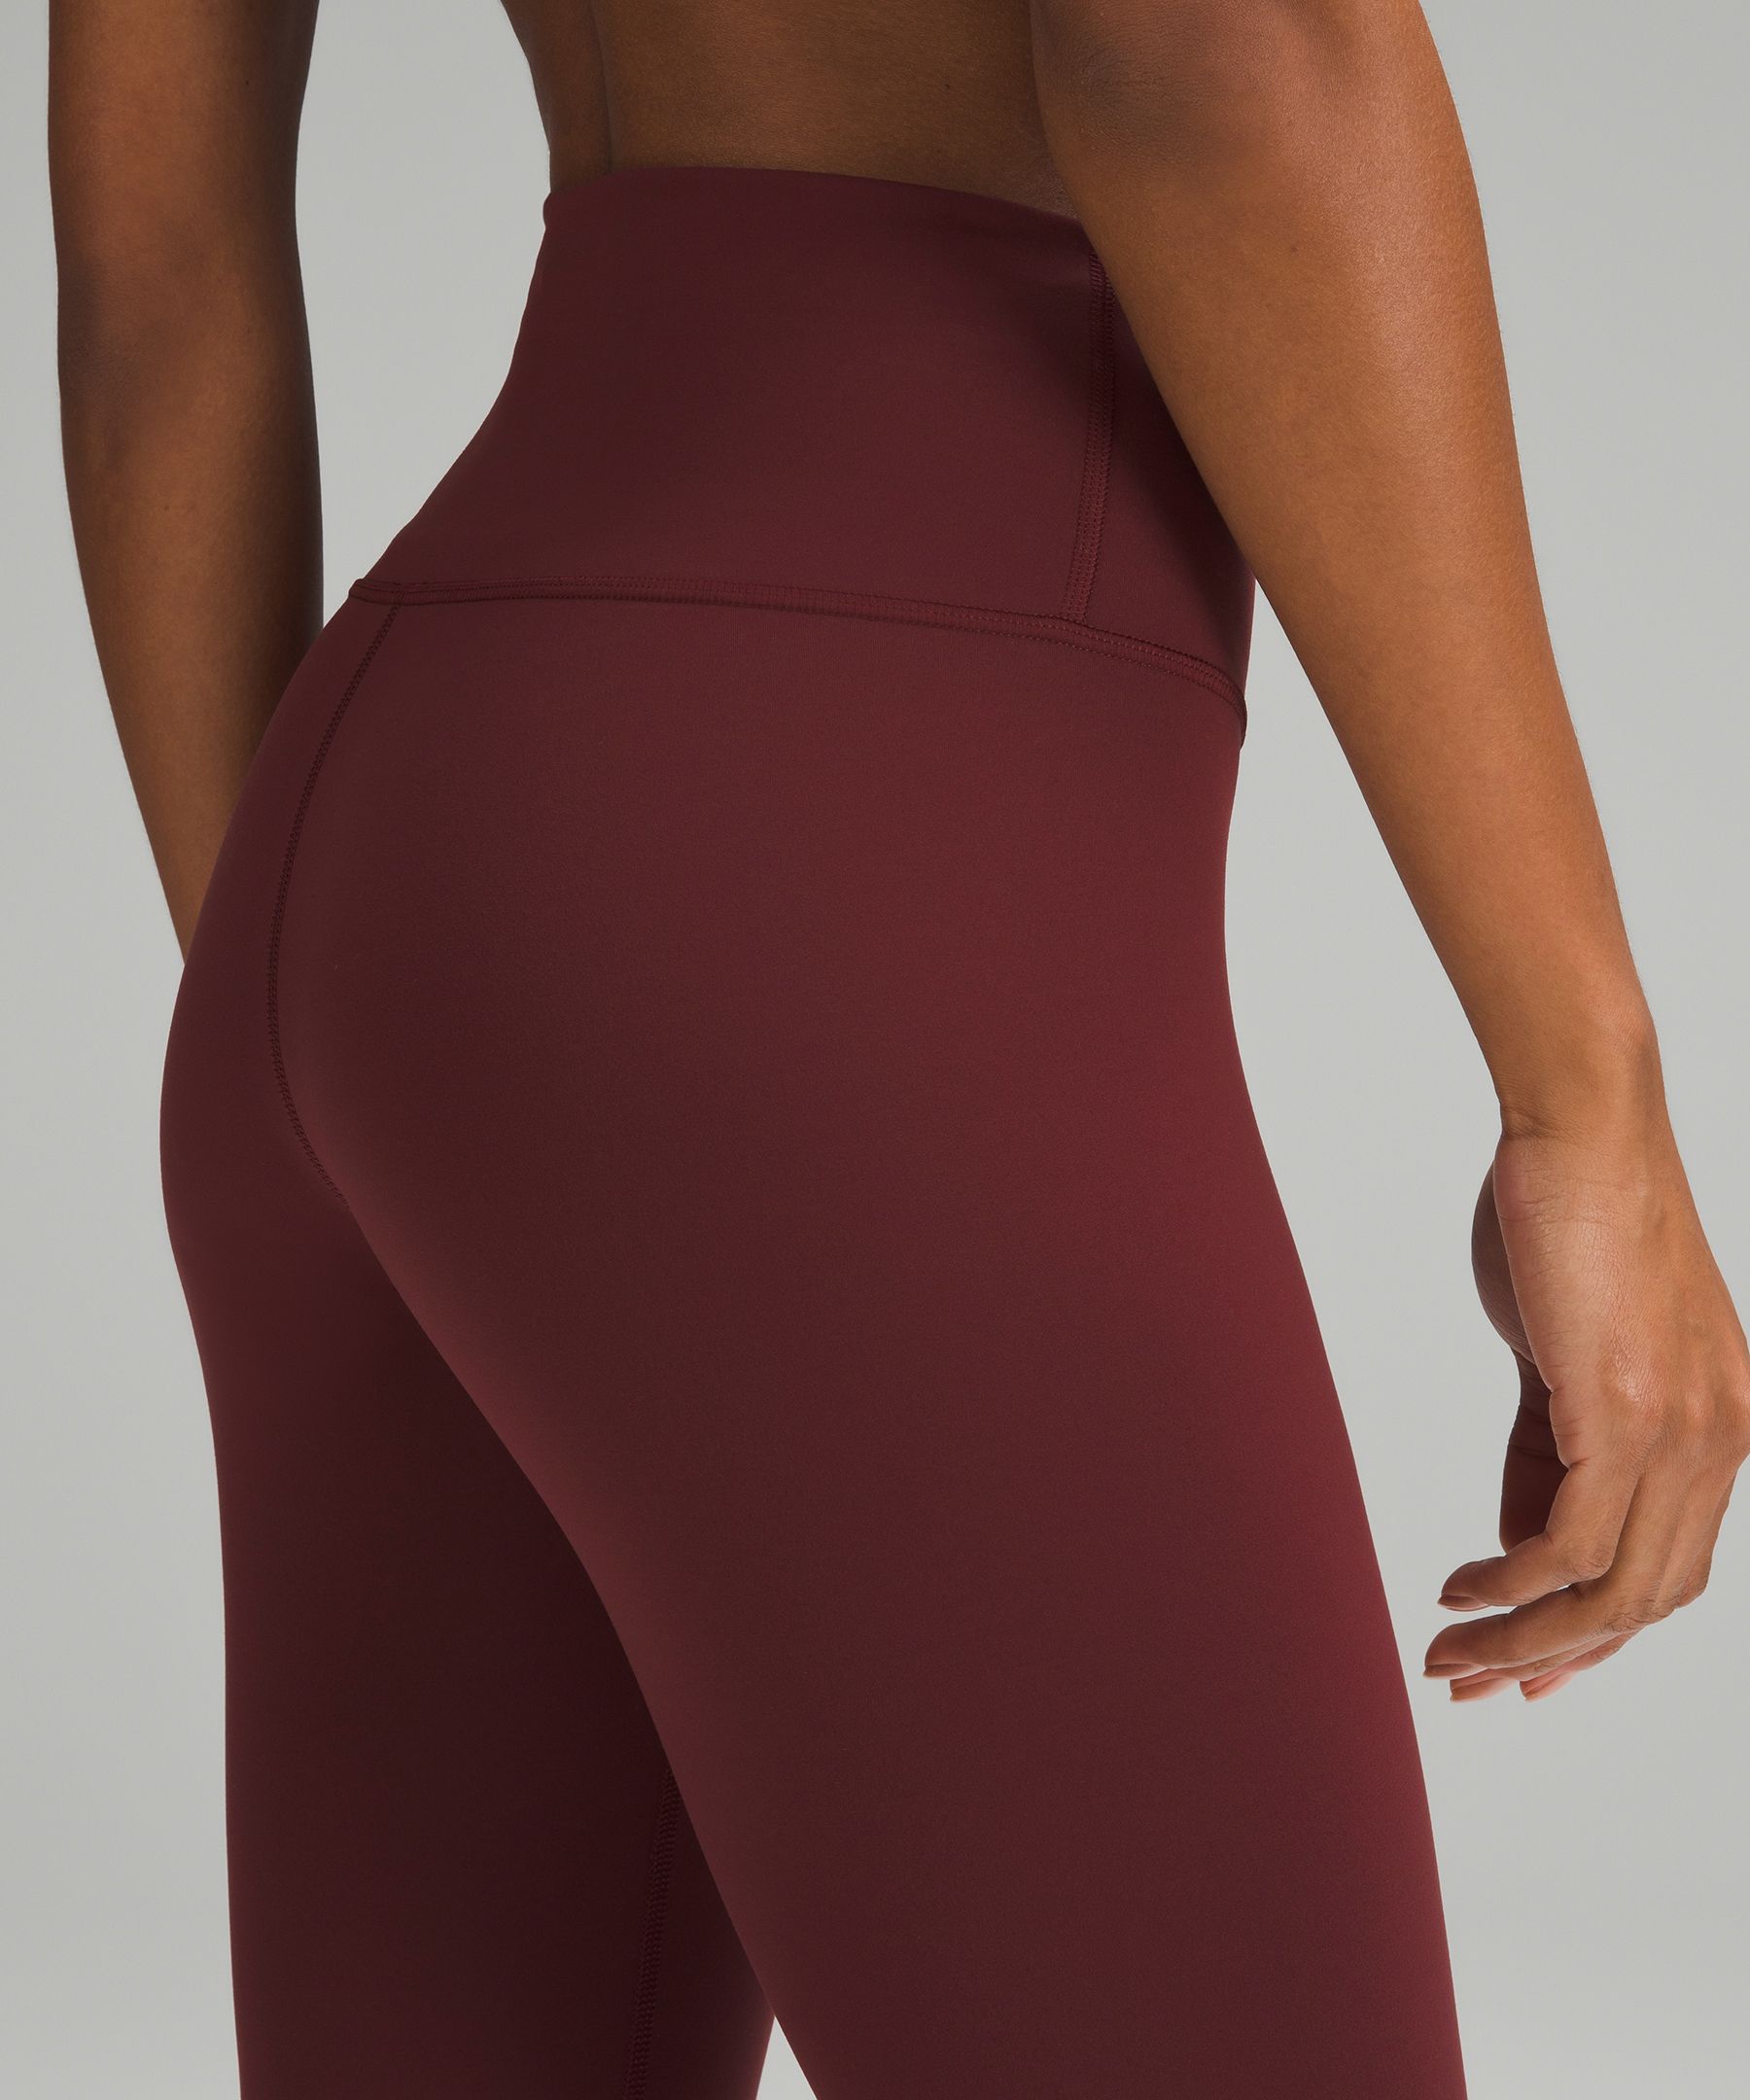 Lululemon Speed Wunder Tight Leggings Size 6 - $79 - From Zoes